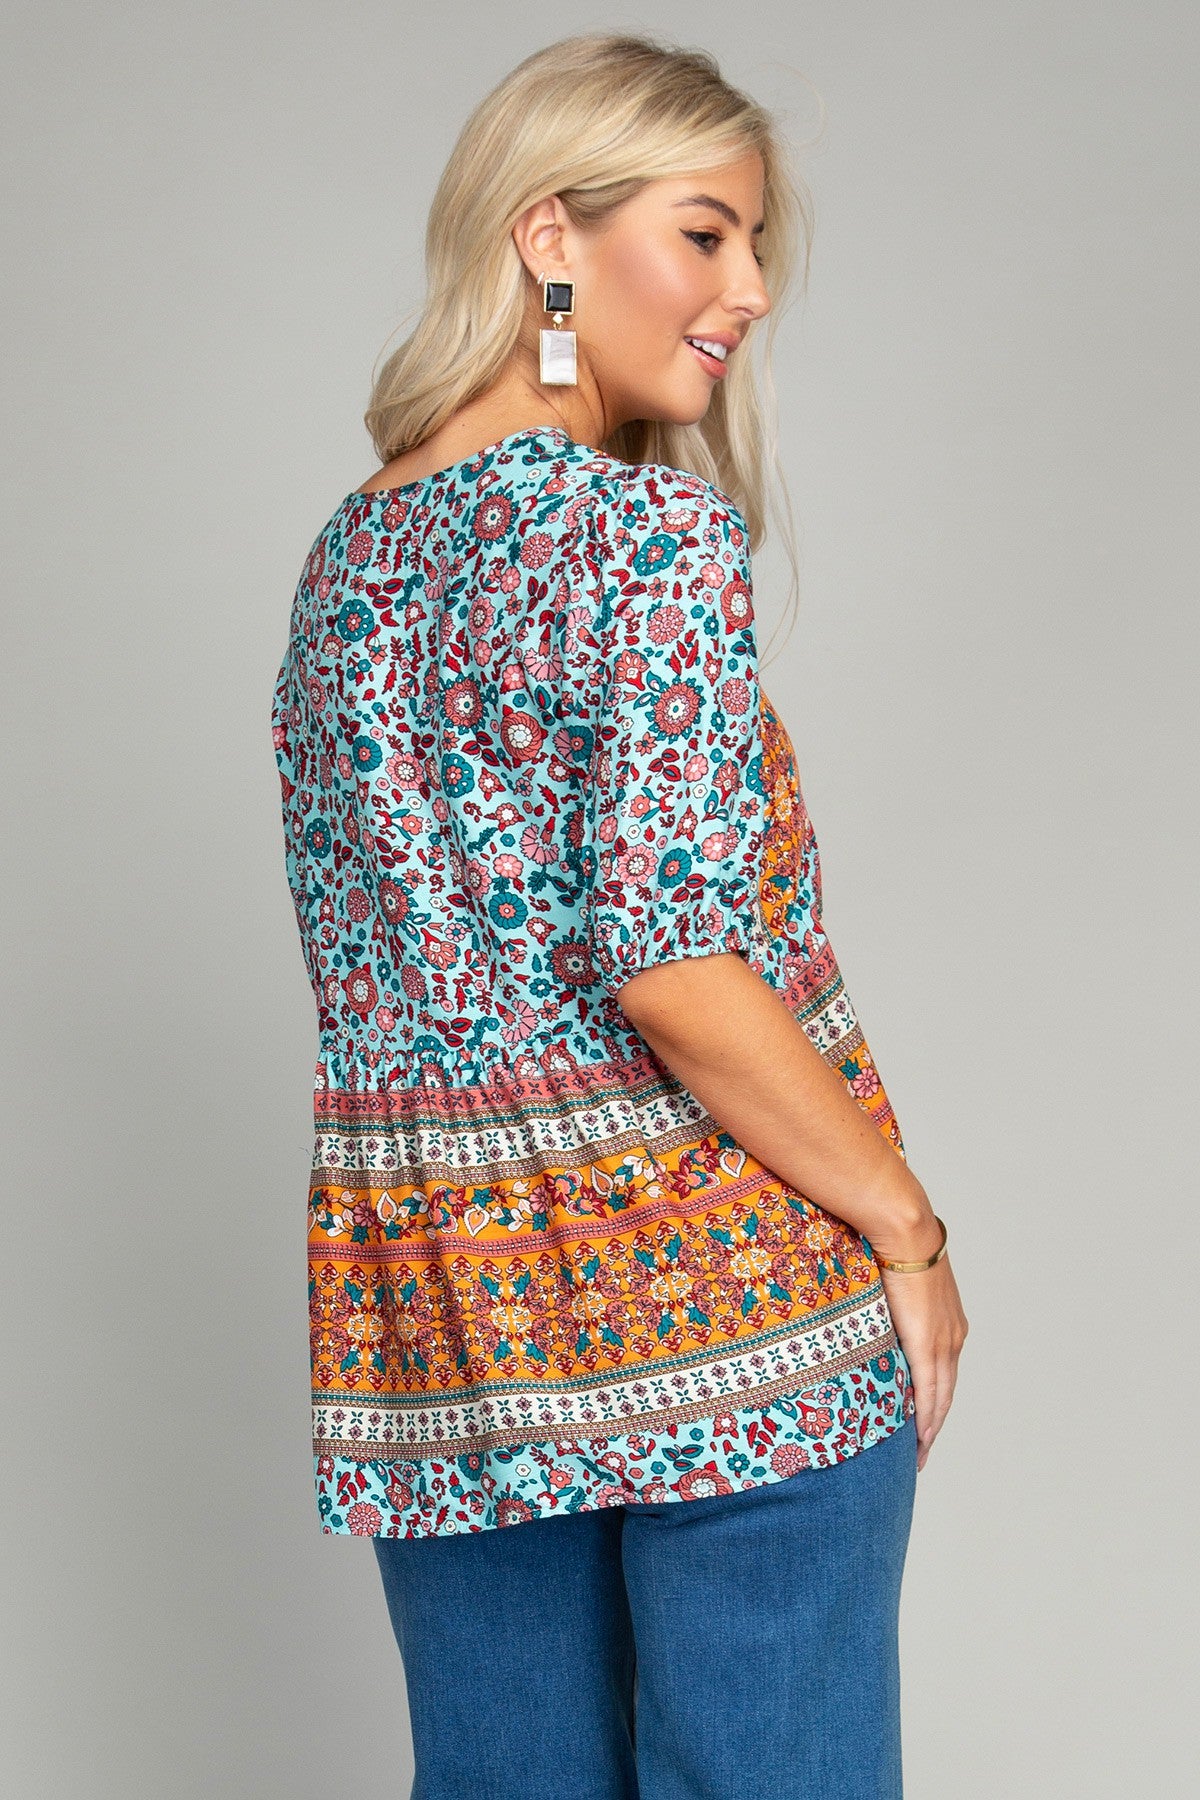 Boho Floral Tunic with Tassel